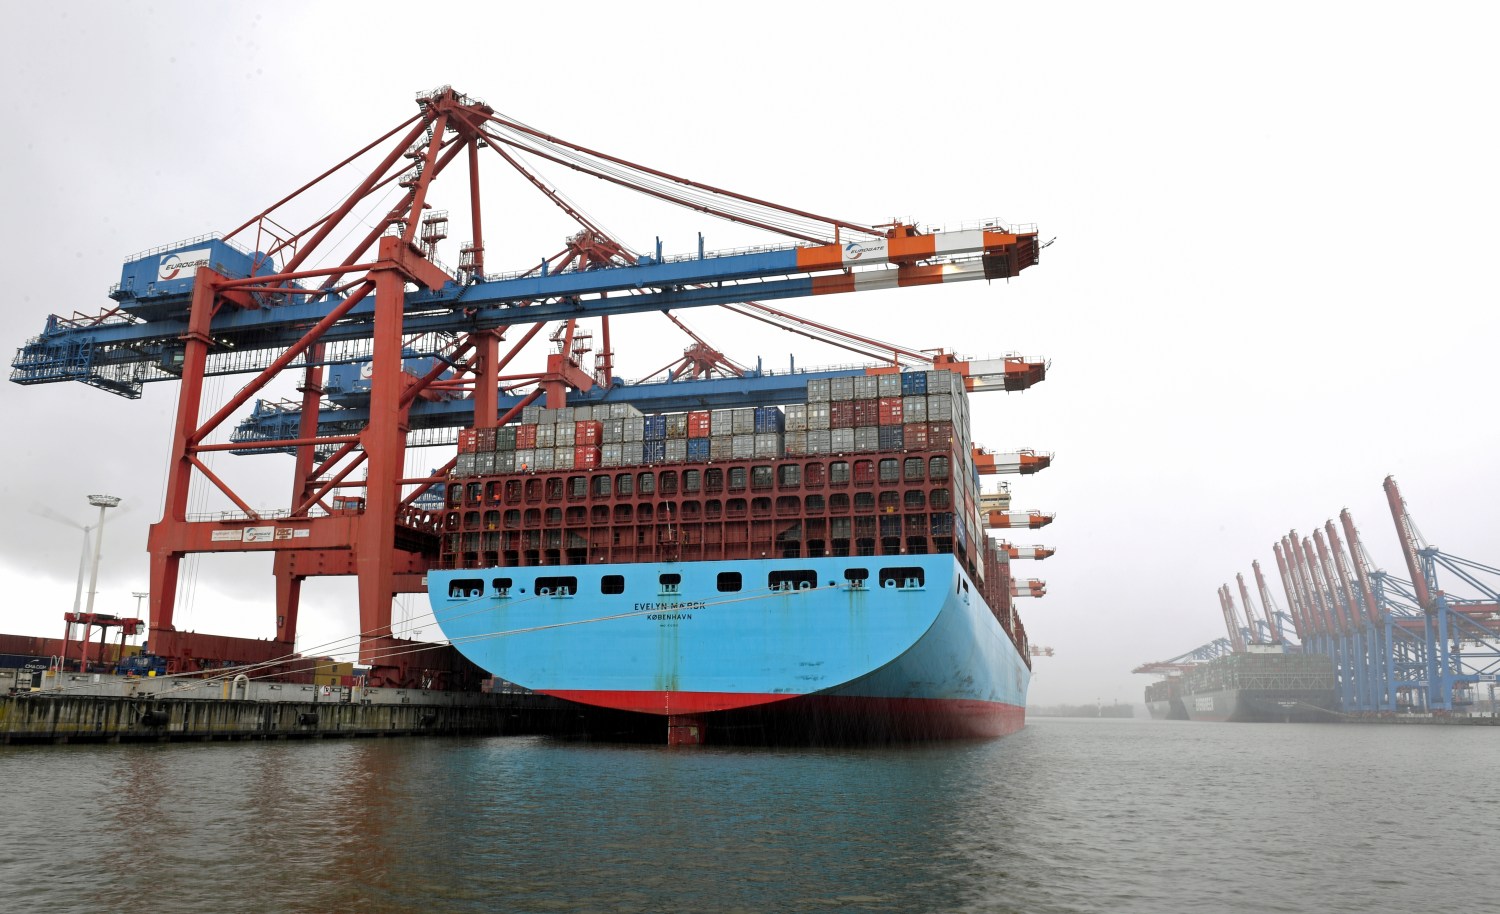 Container ship "Evelyn Maersk" is loaded during snowfall at a container terminal in a harbour amid the coronavirus disease pandemic.